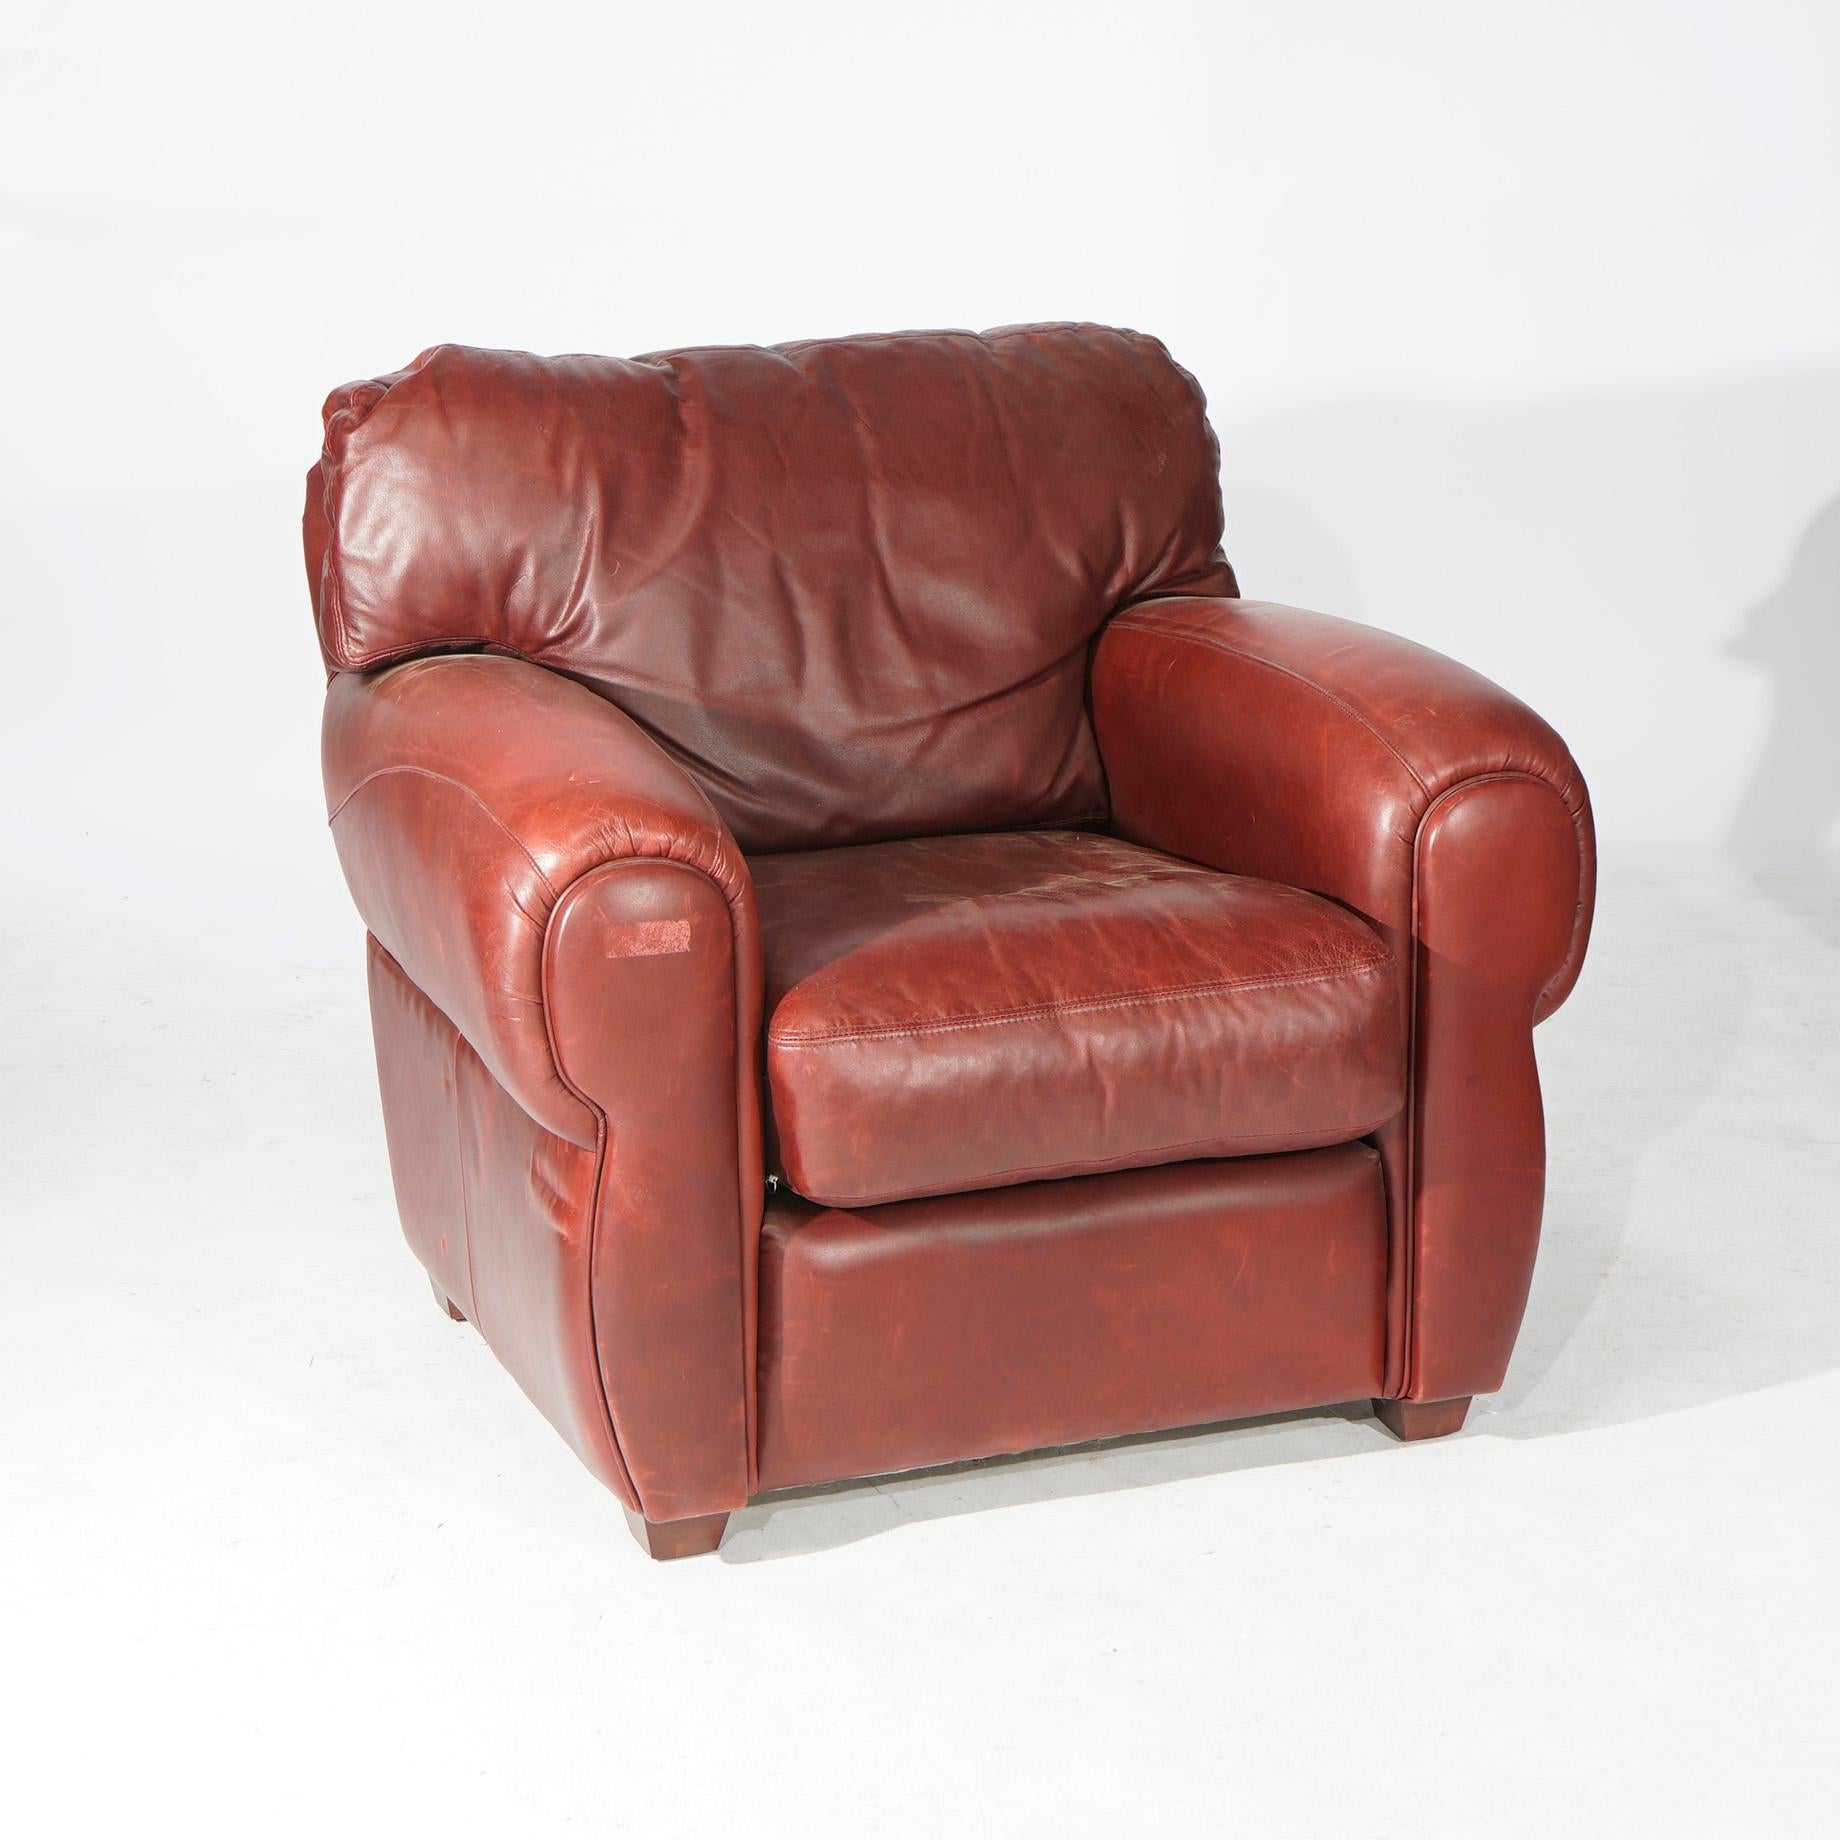 A leather club chair by Elite offers overstuffed form with red/brown (cordovan) leather and has matching ottoman, maker label as photographed, 20th century

Measures- Chair 34'' H x 39.5'' W x 37'' D; Ottoman 16.5'' H x 30'' W x 21.5'' D.